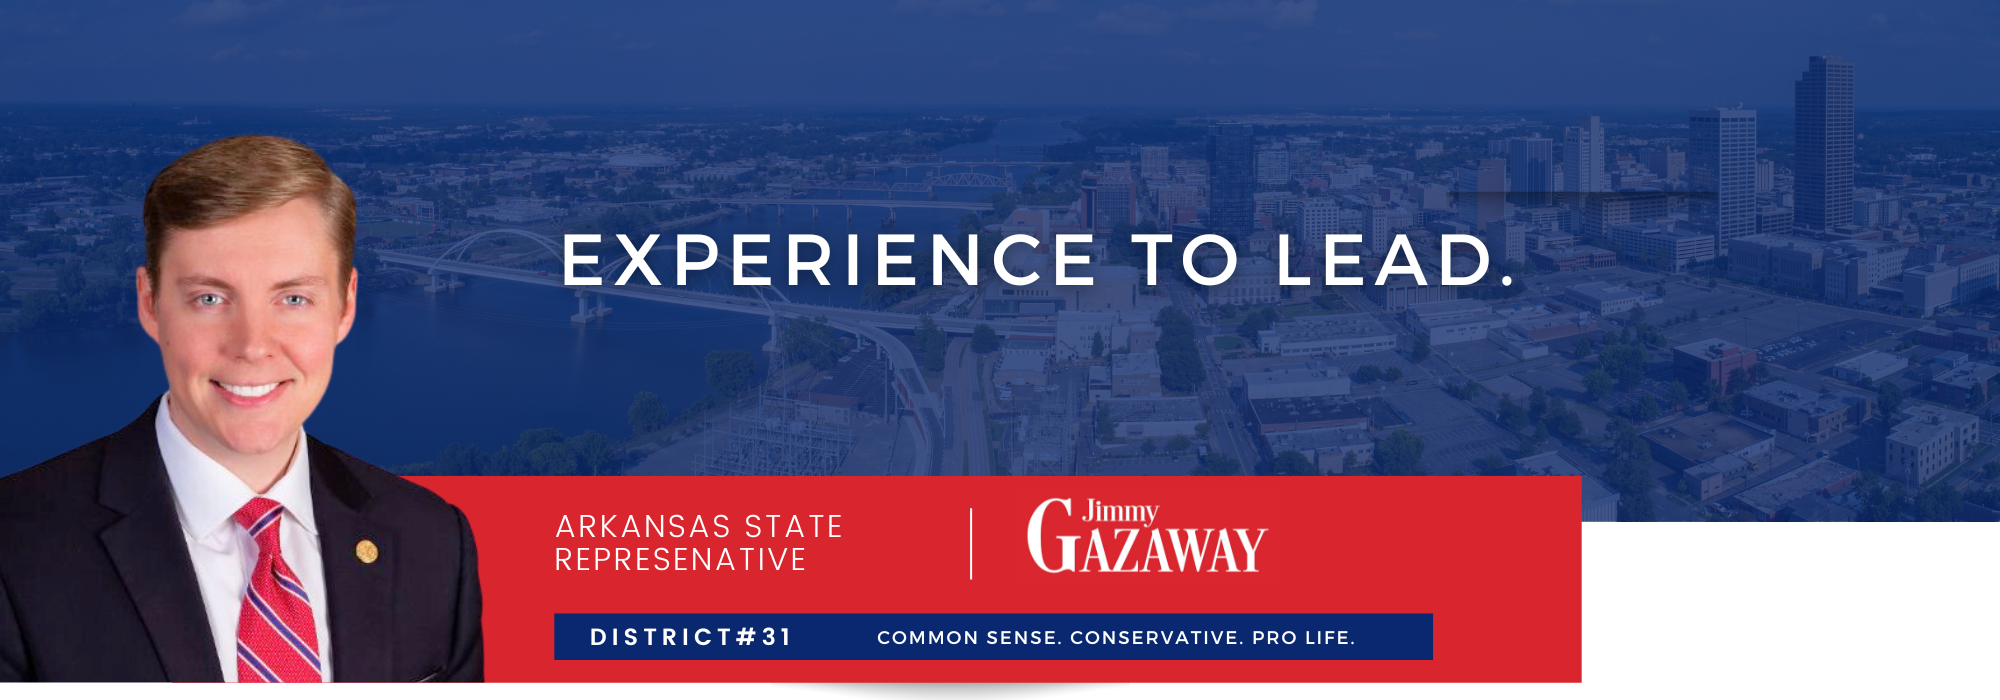  Jimmy Gazaway picture over photo of Arkansas with quote experience to lead